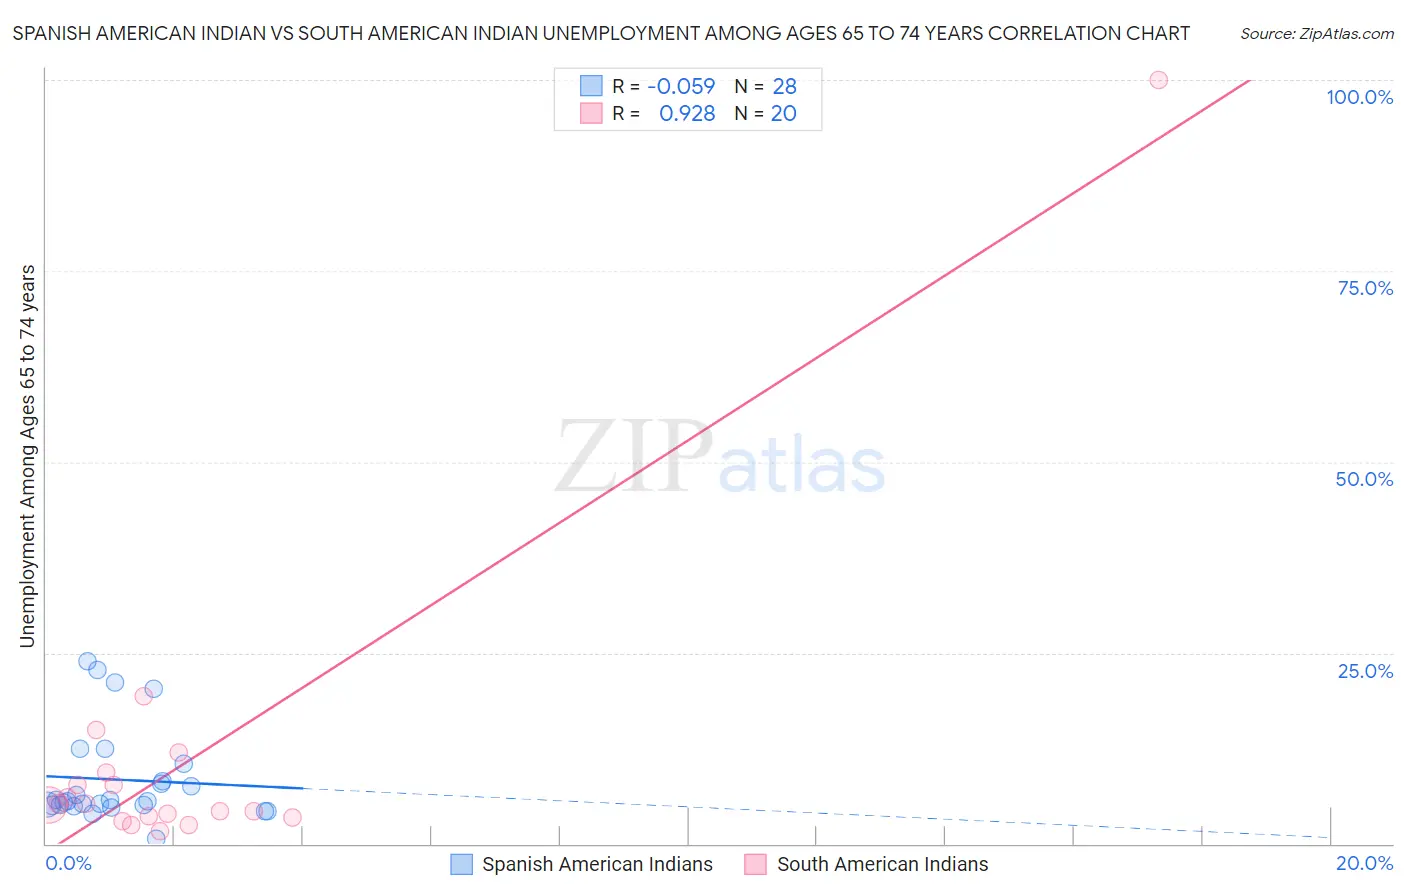 Spanish American Indian vs South American Indian Unemployment Among Ages 65 to 74 years